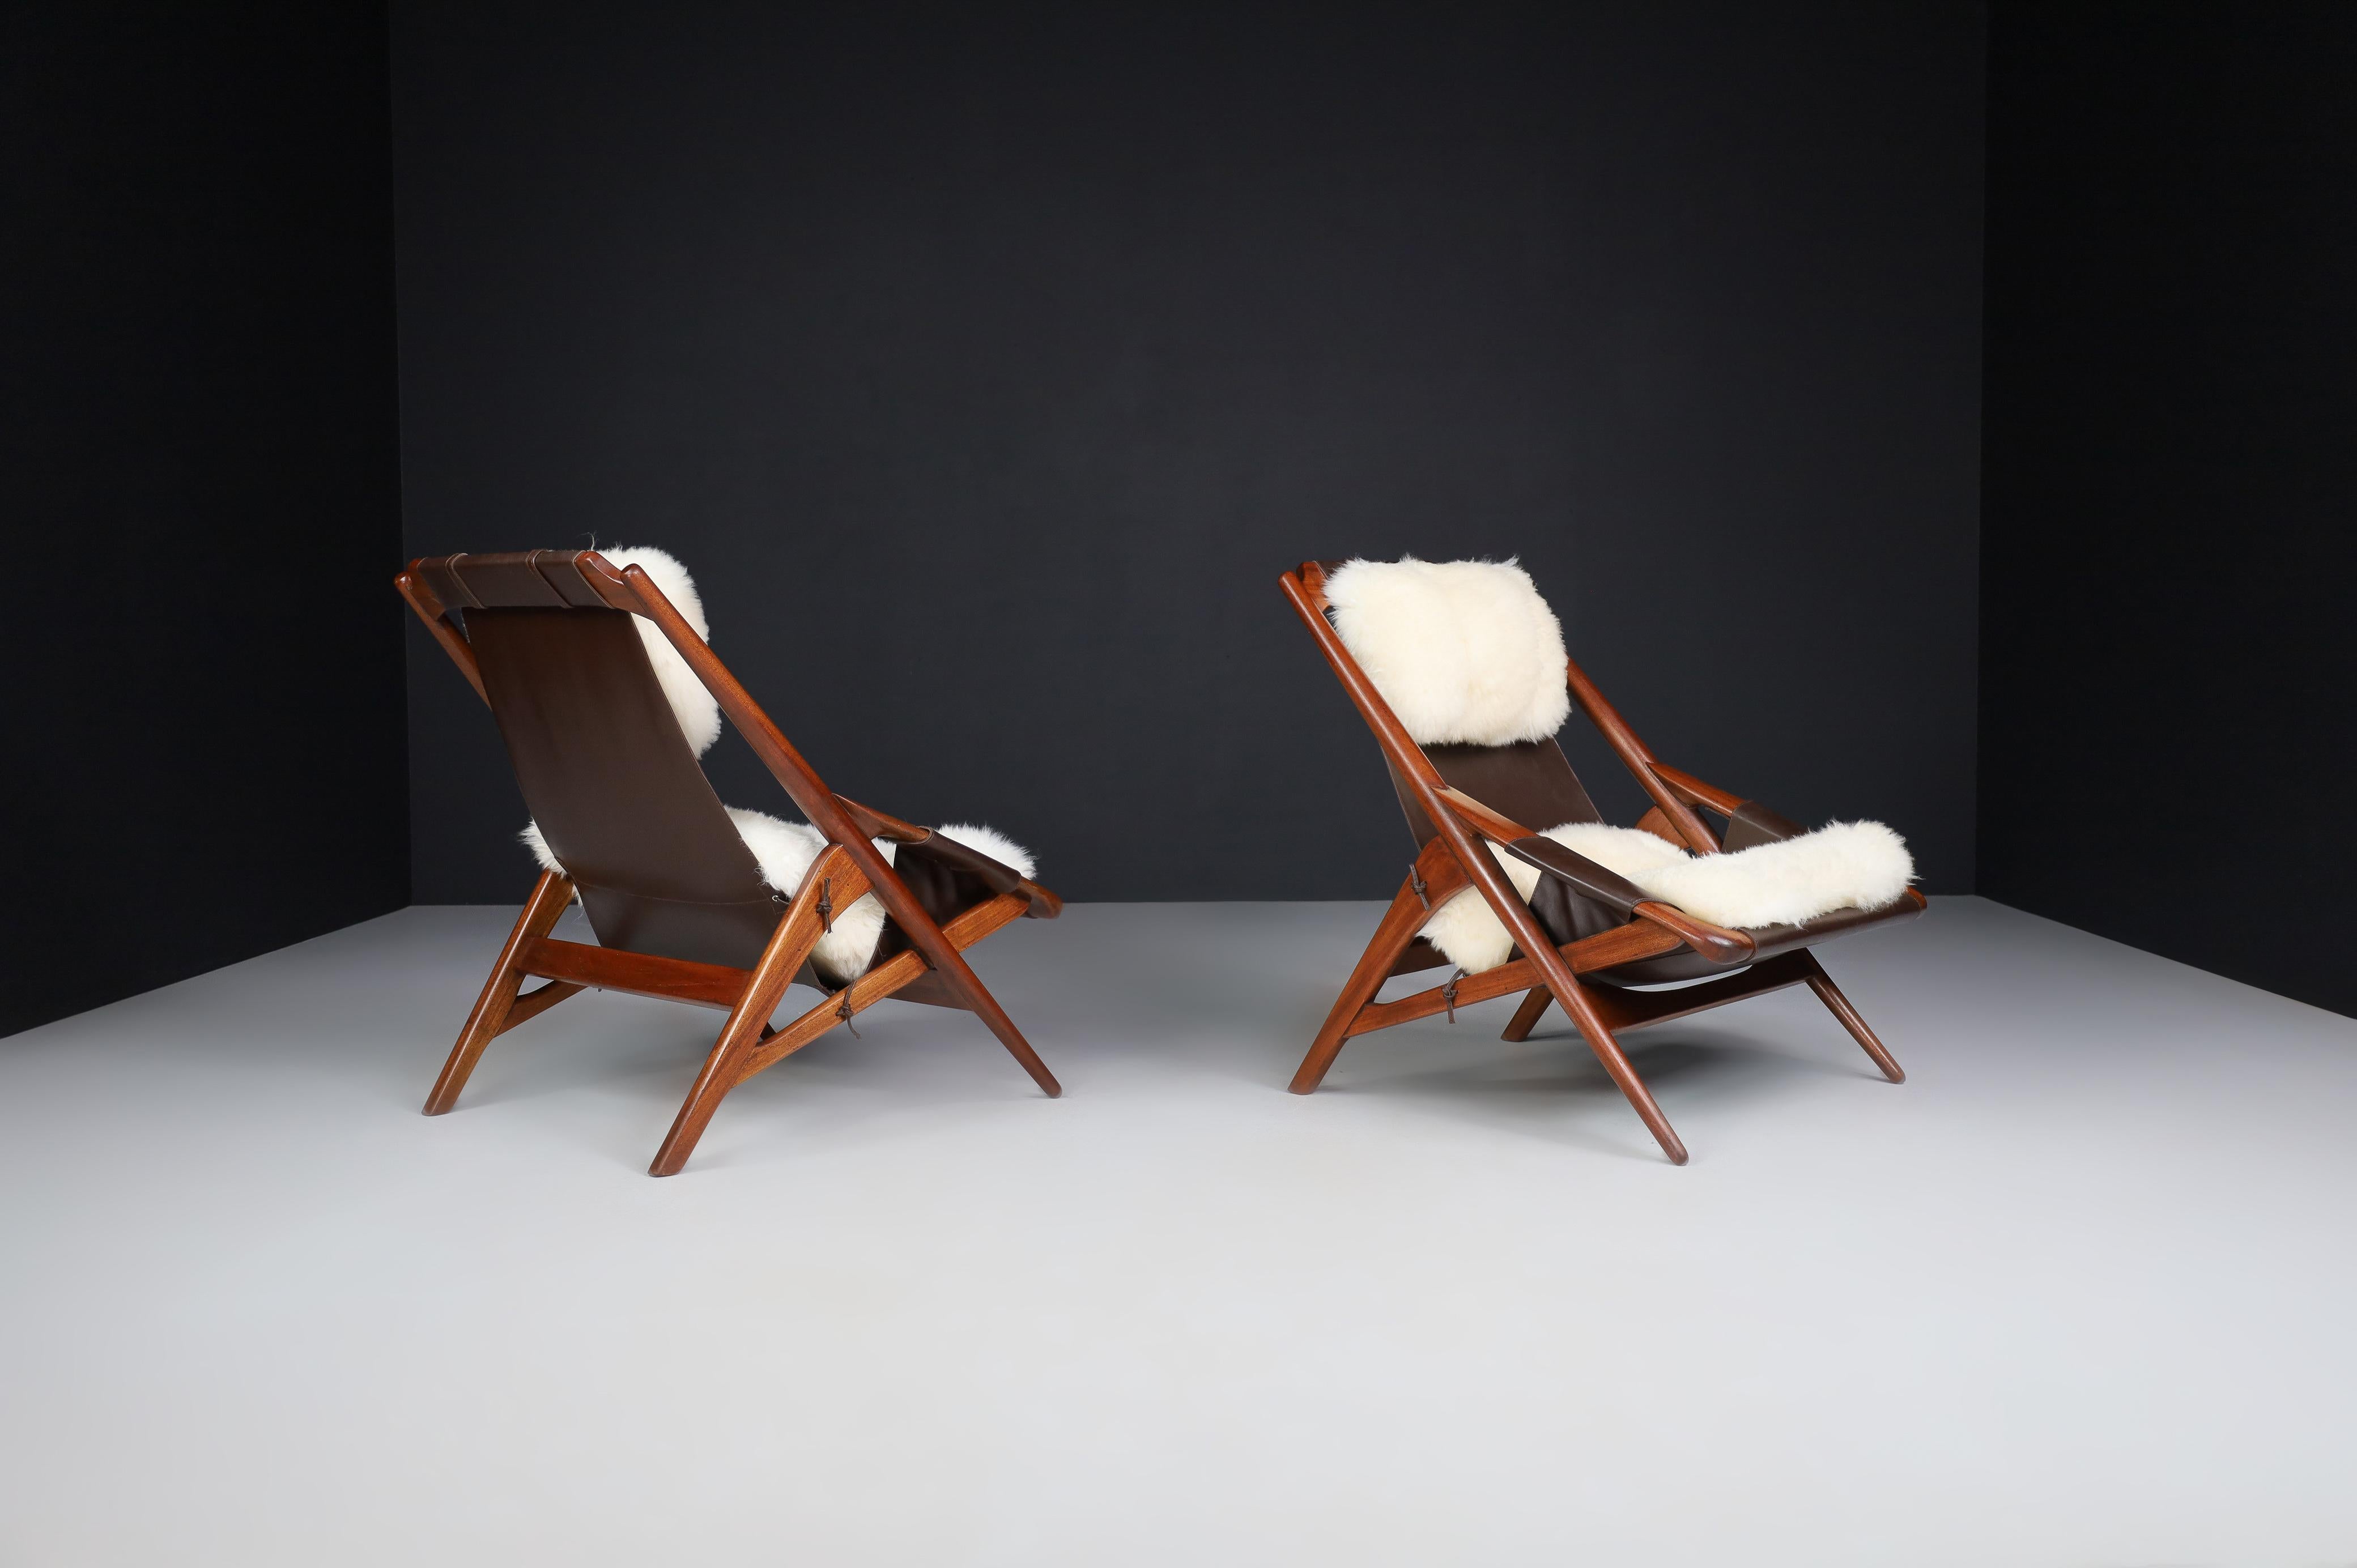 W.D. Andersag Lounge Chairs Teak and Leather, Italy, 1959 For Sale 3